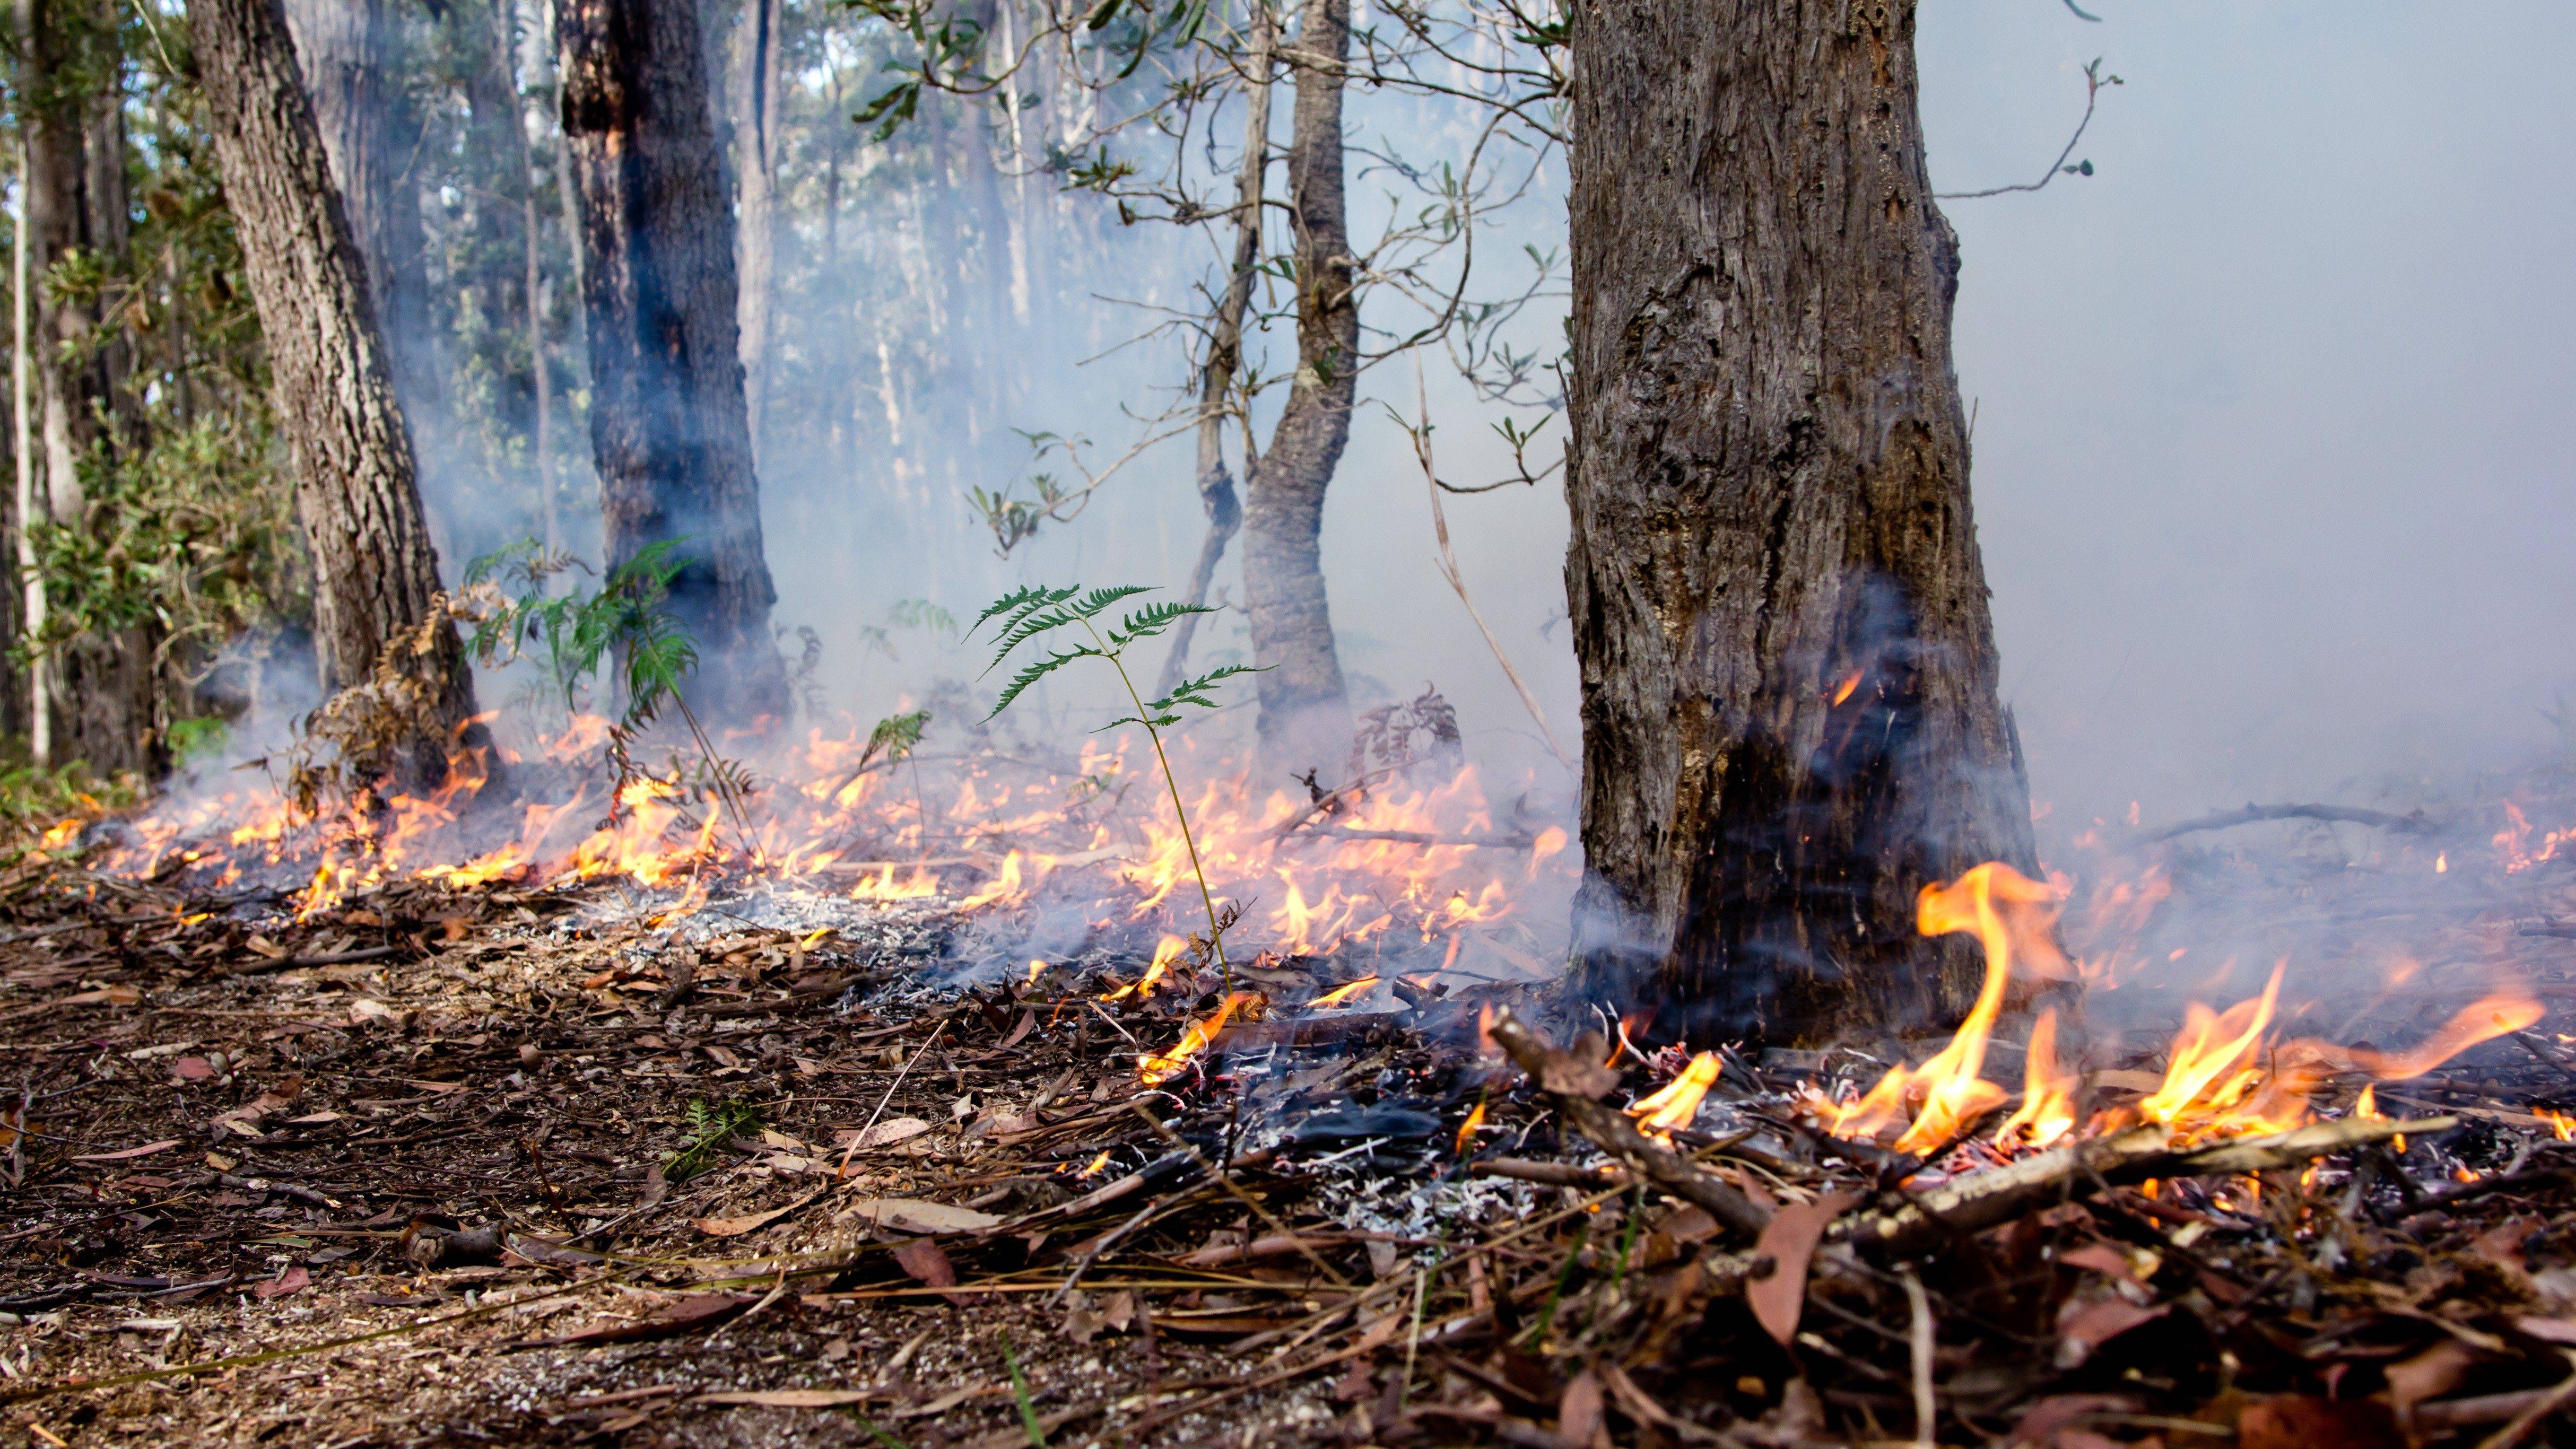 Traditional cool burns could save our bushland, says Koori community